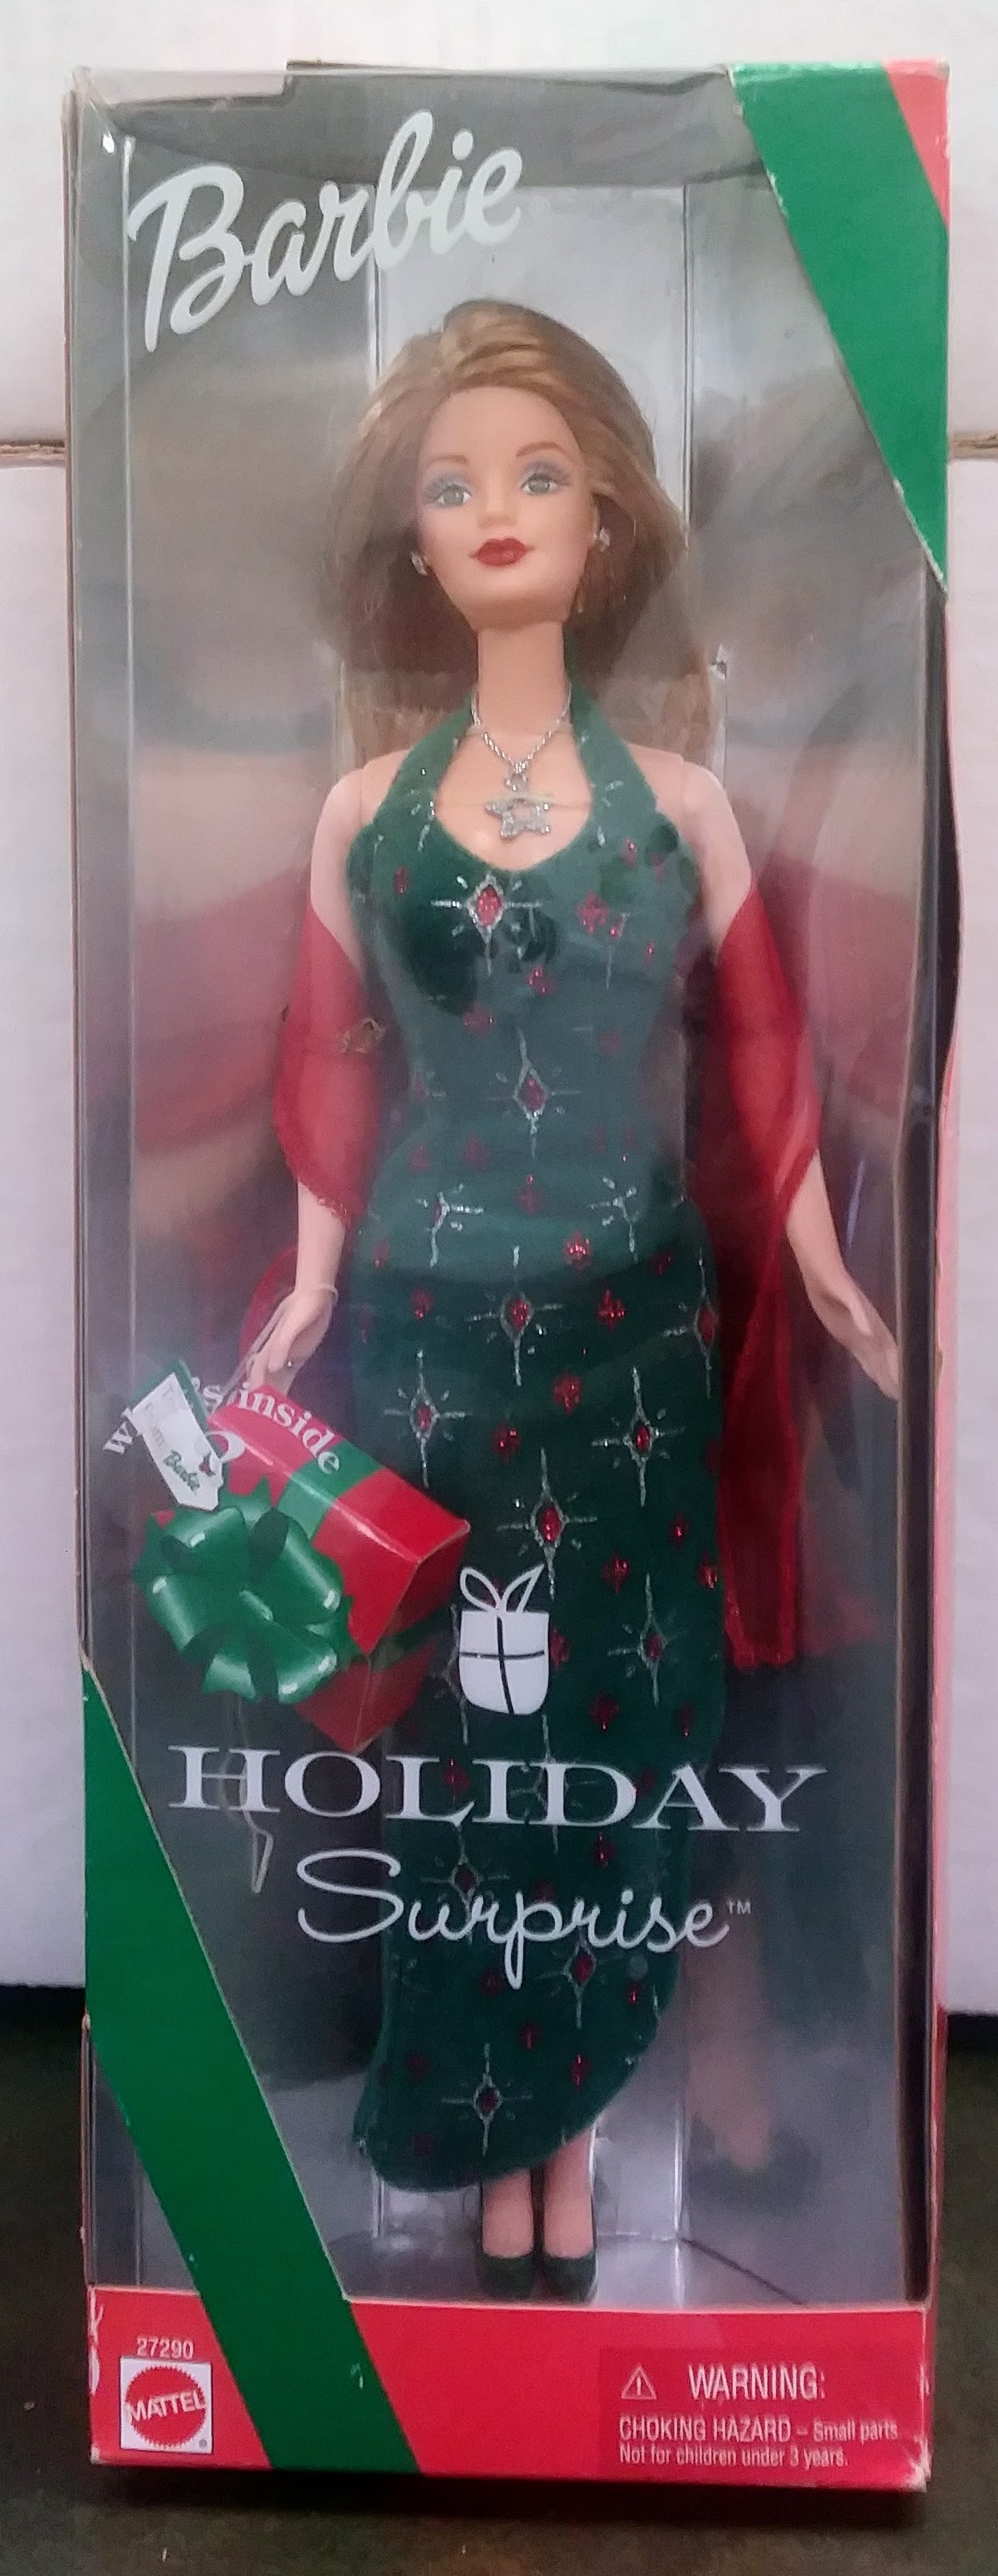 Barbie Doll - Holiday Surprise Barbie (2000)